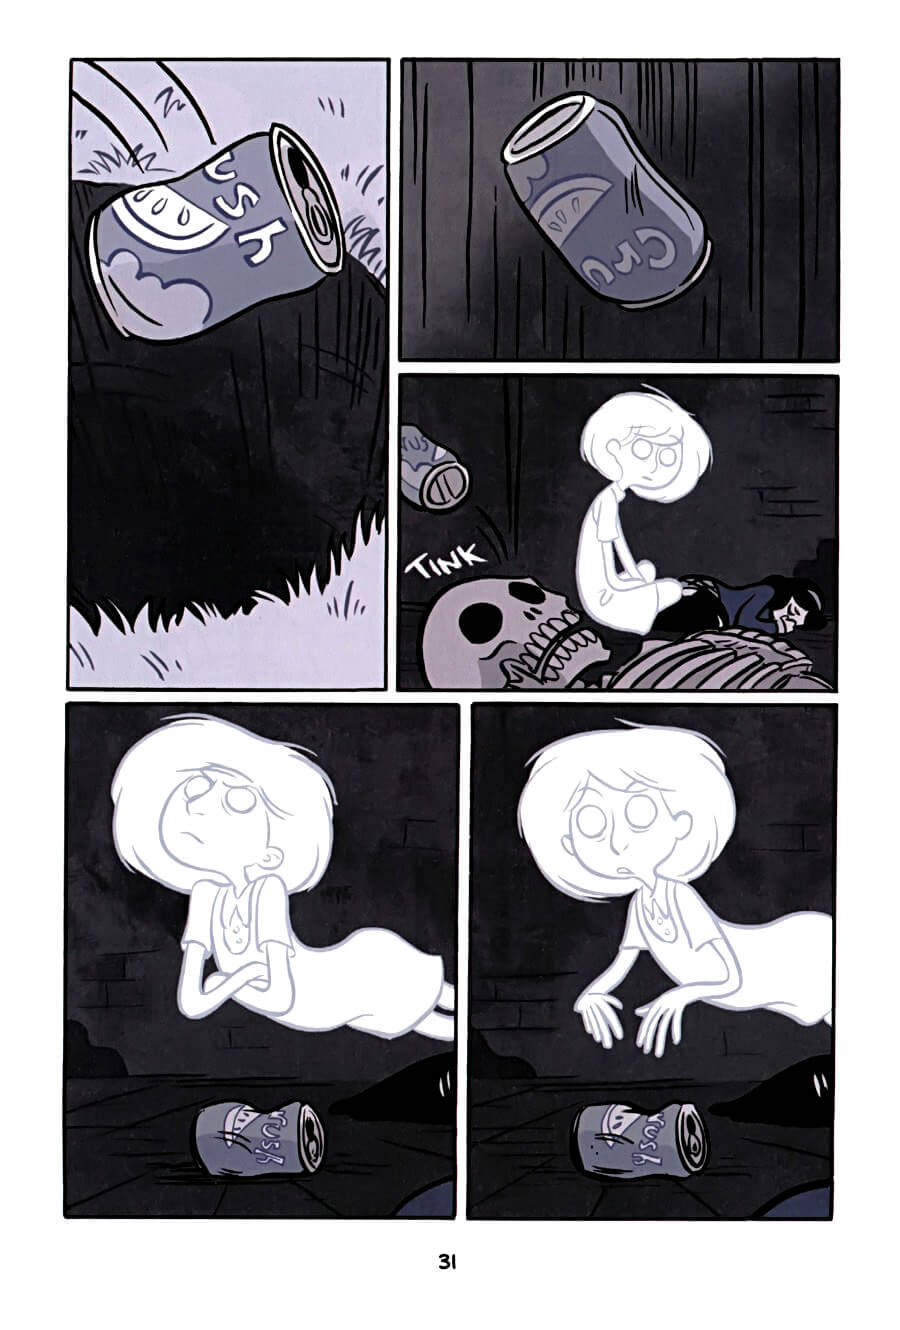 page 31 of anya's ghost graphic novel